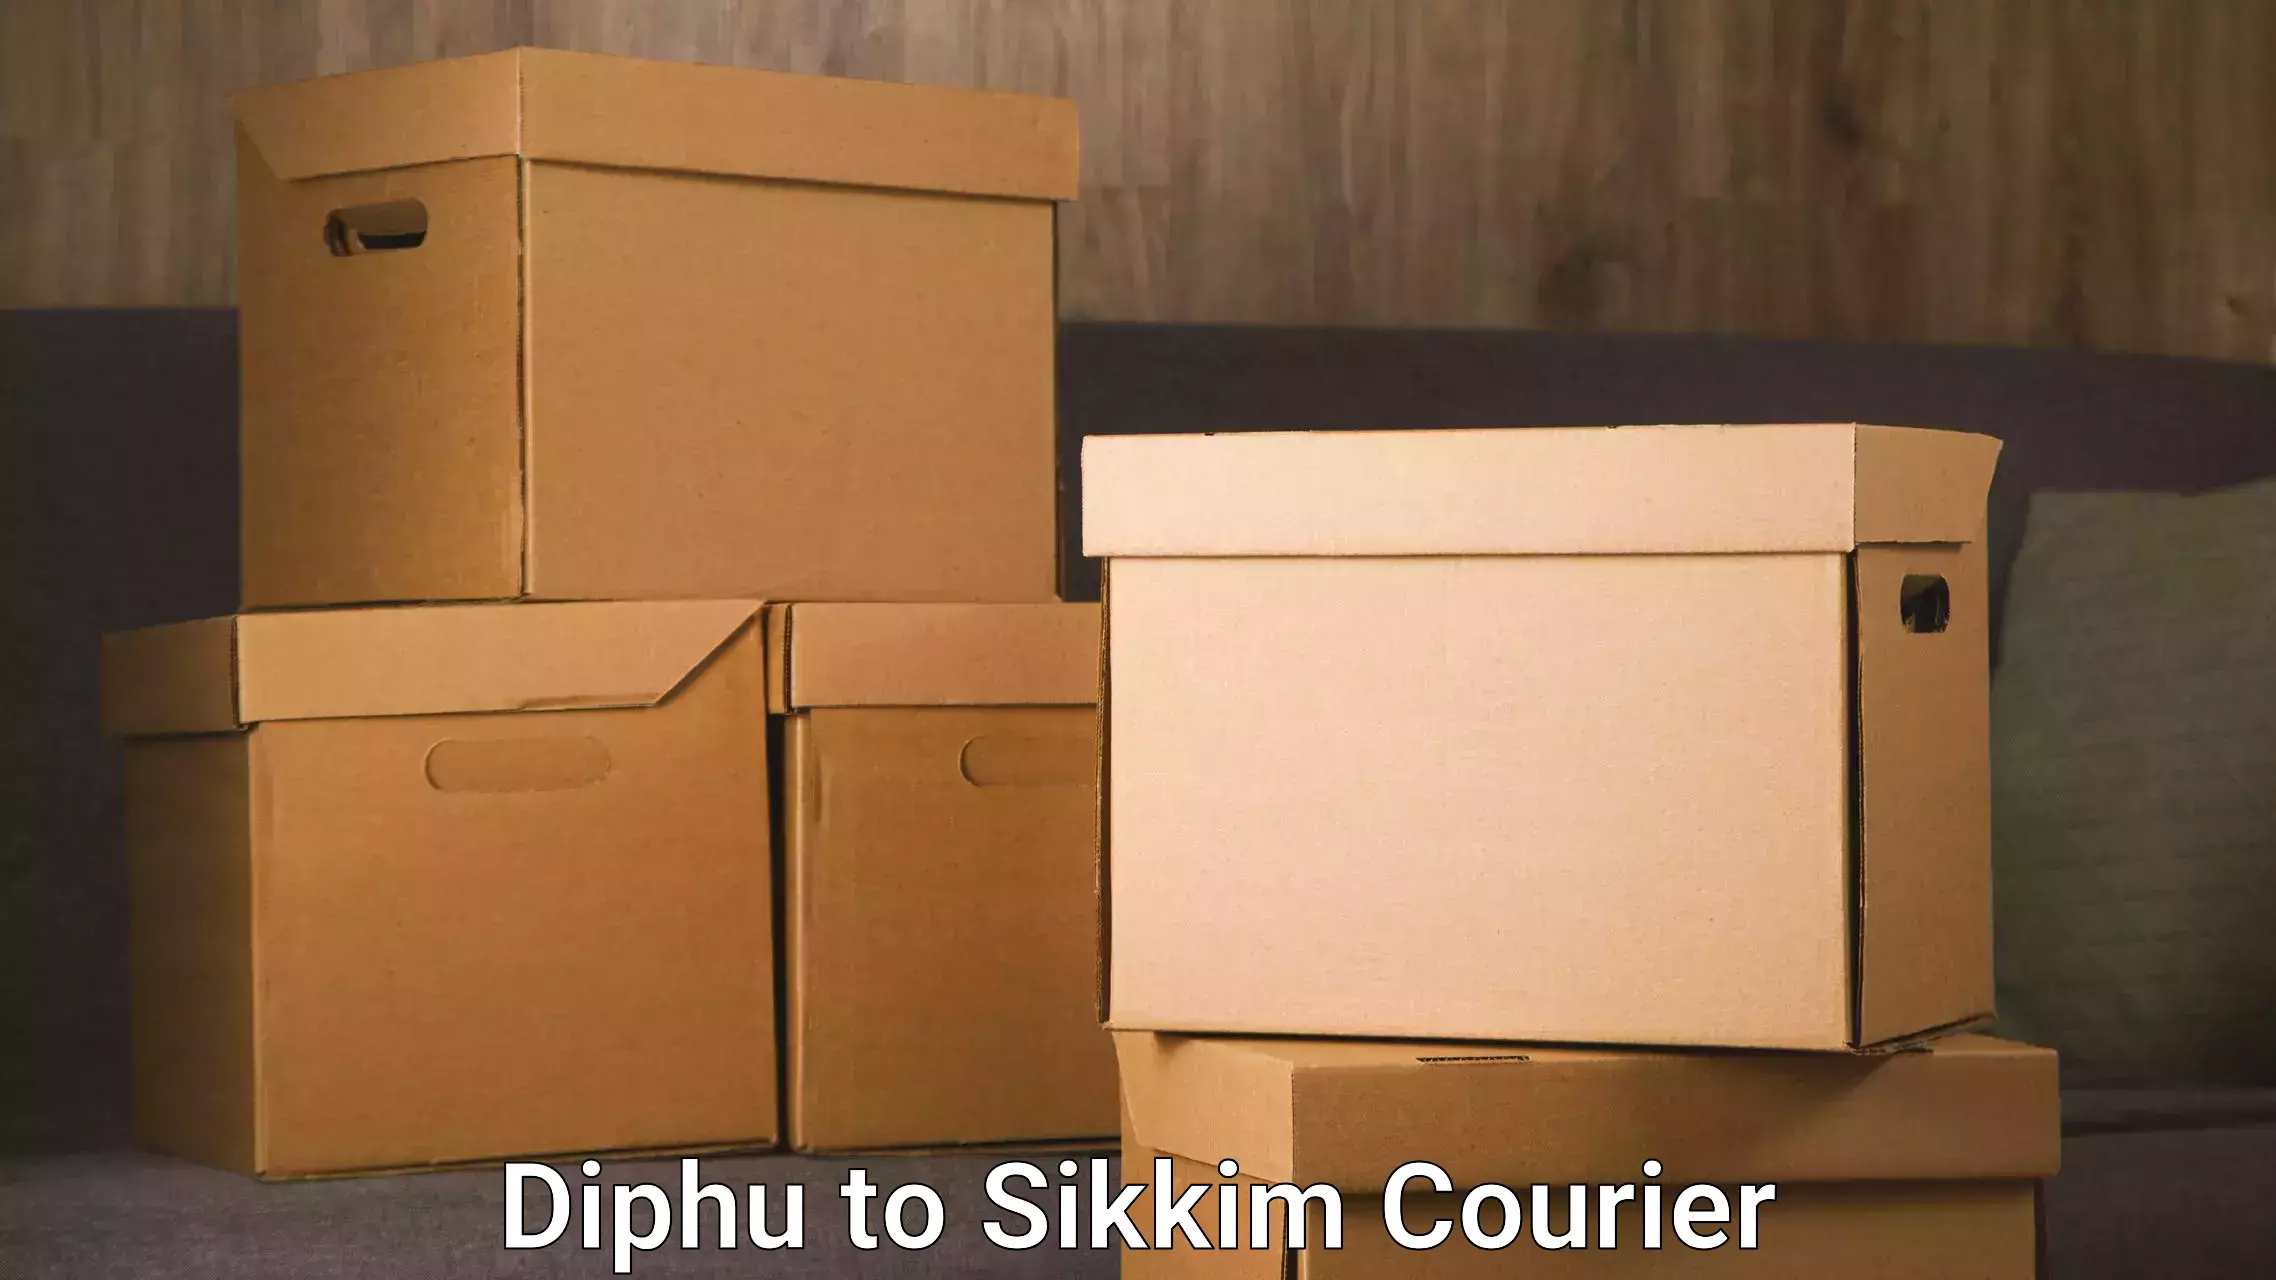 State-of-the-art courier technology Diphu to East Sikkim